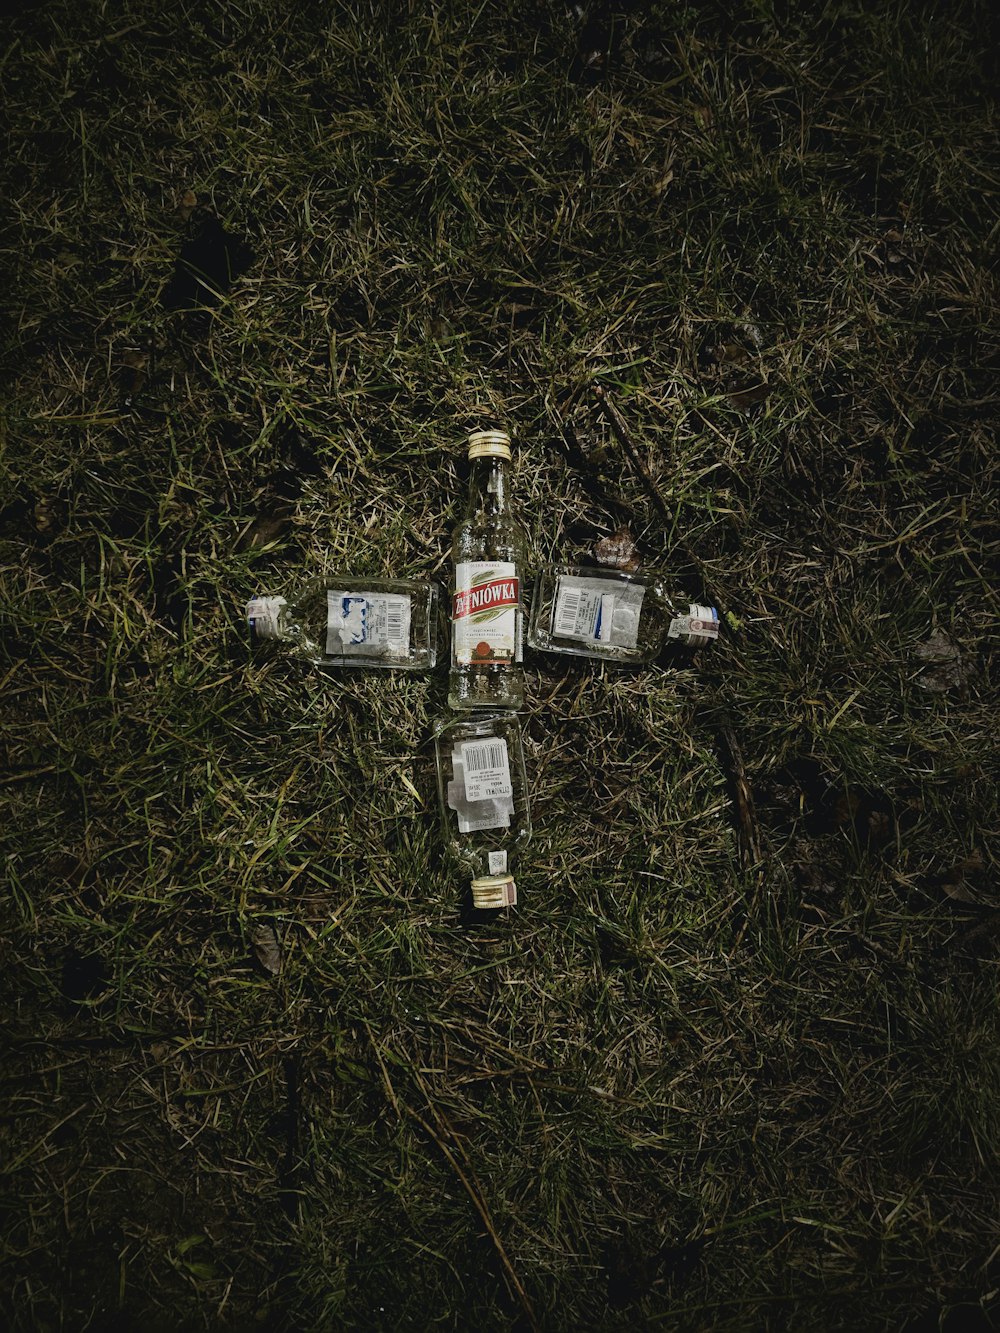 a cross made out of empty bottles on the ground